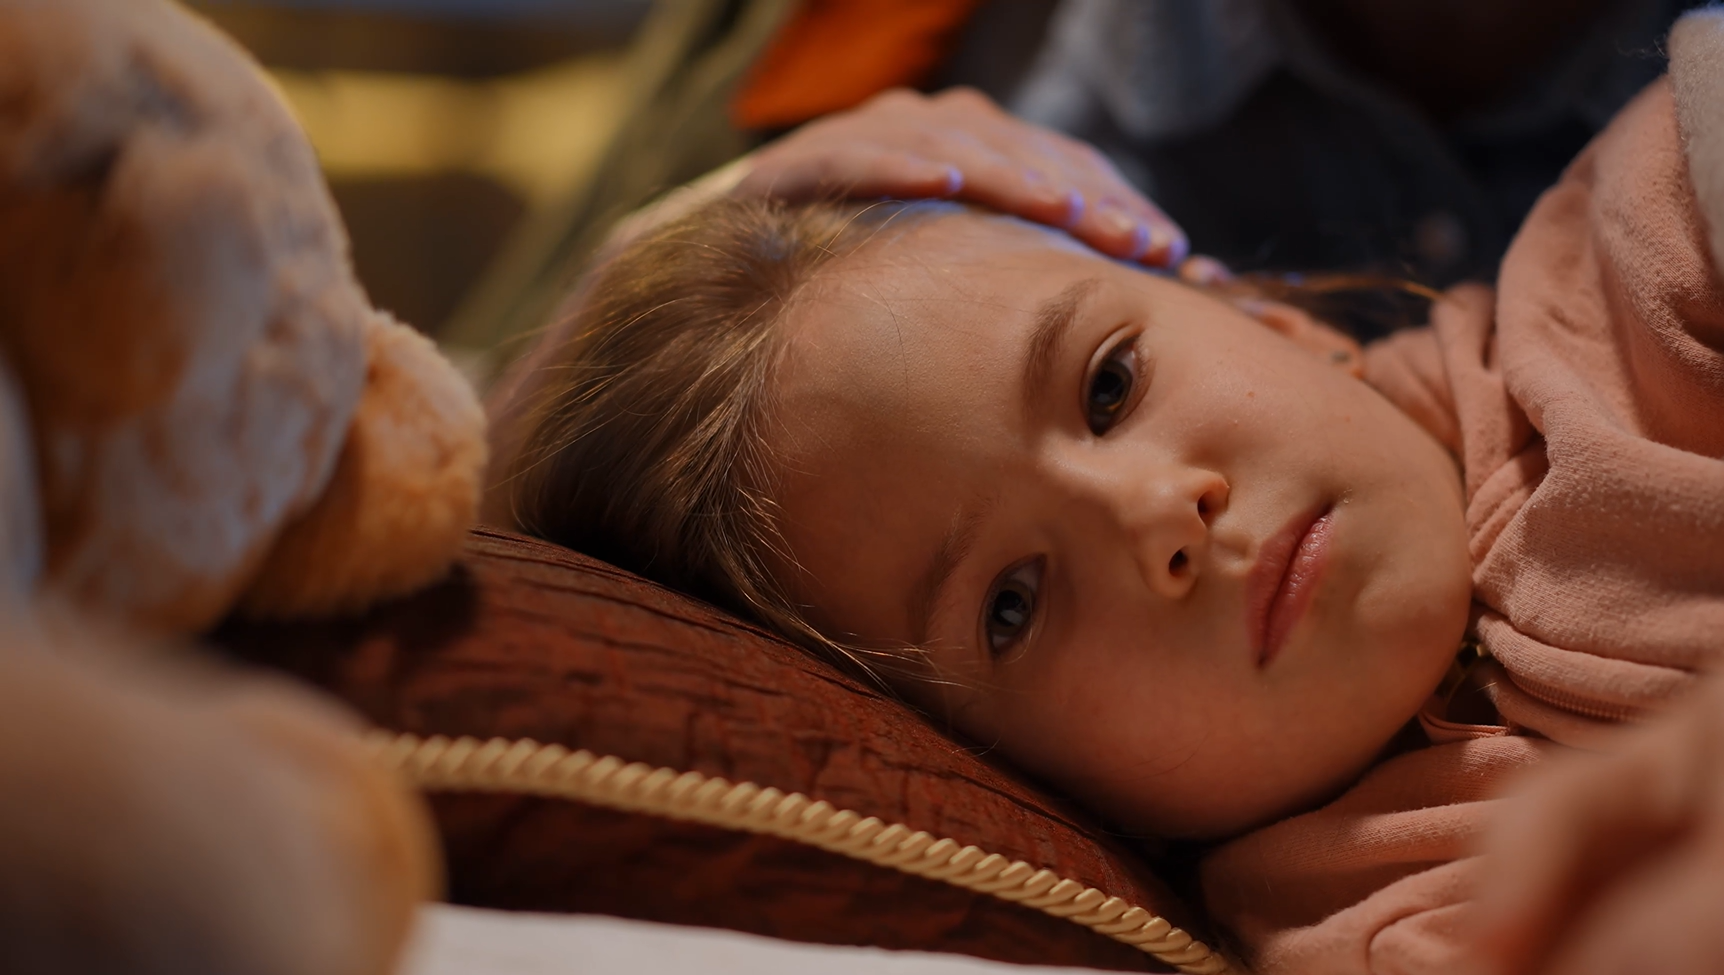 A child lays on her side, with her head resting on a pillow. A parents hand is resting gently on her head.